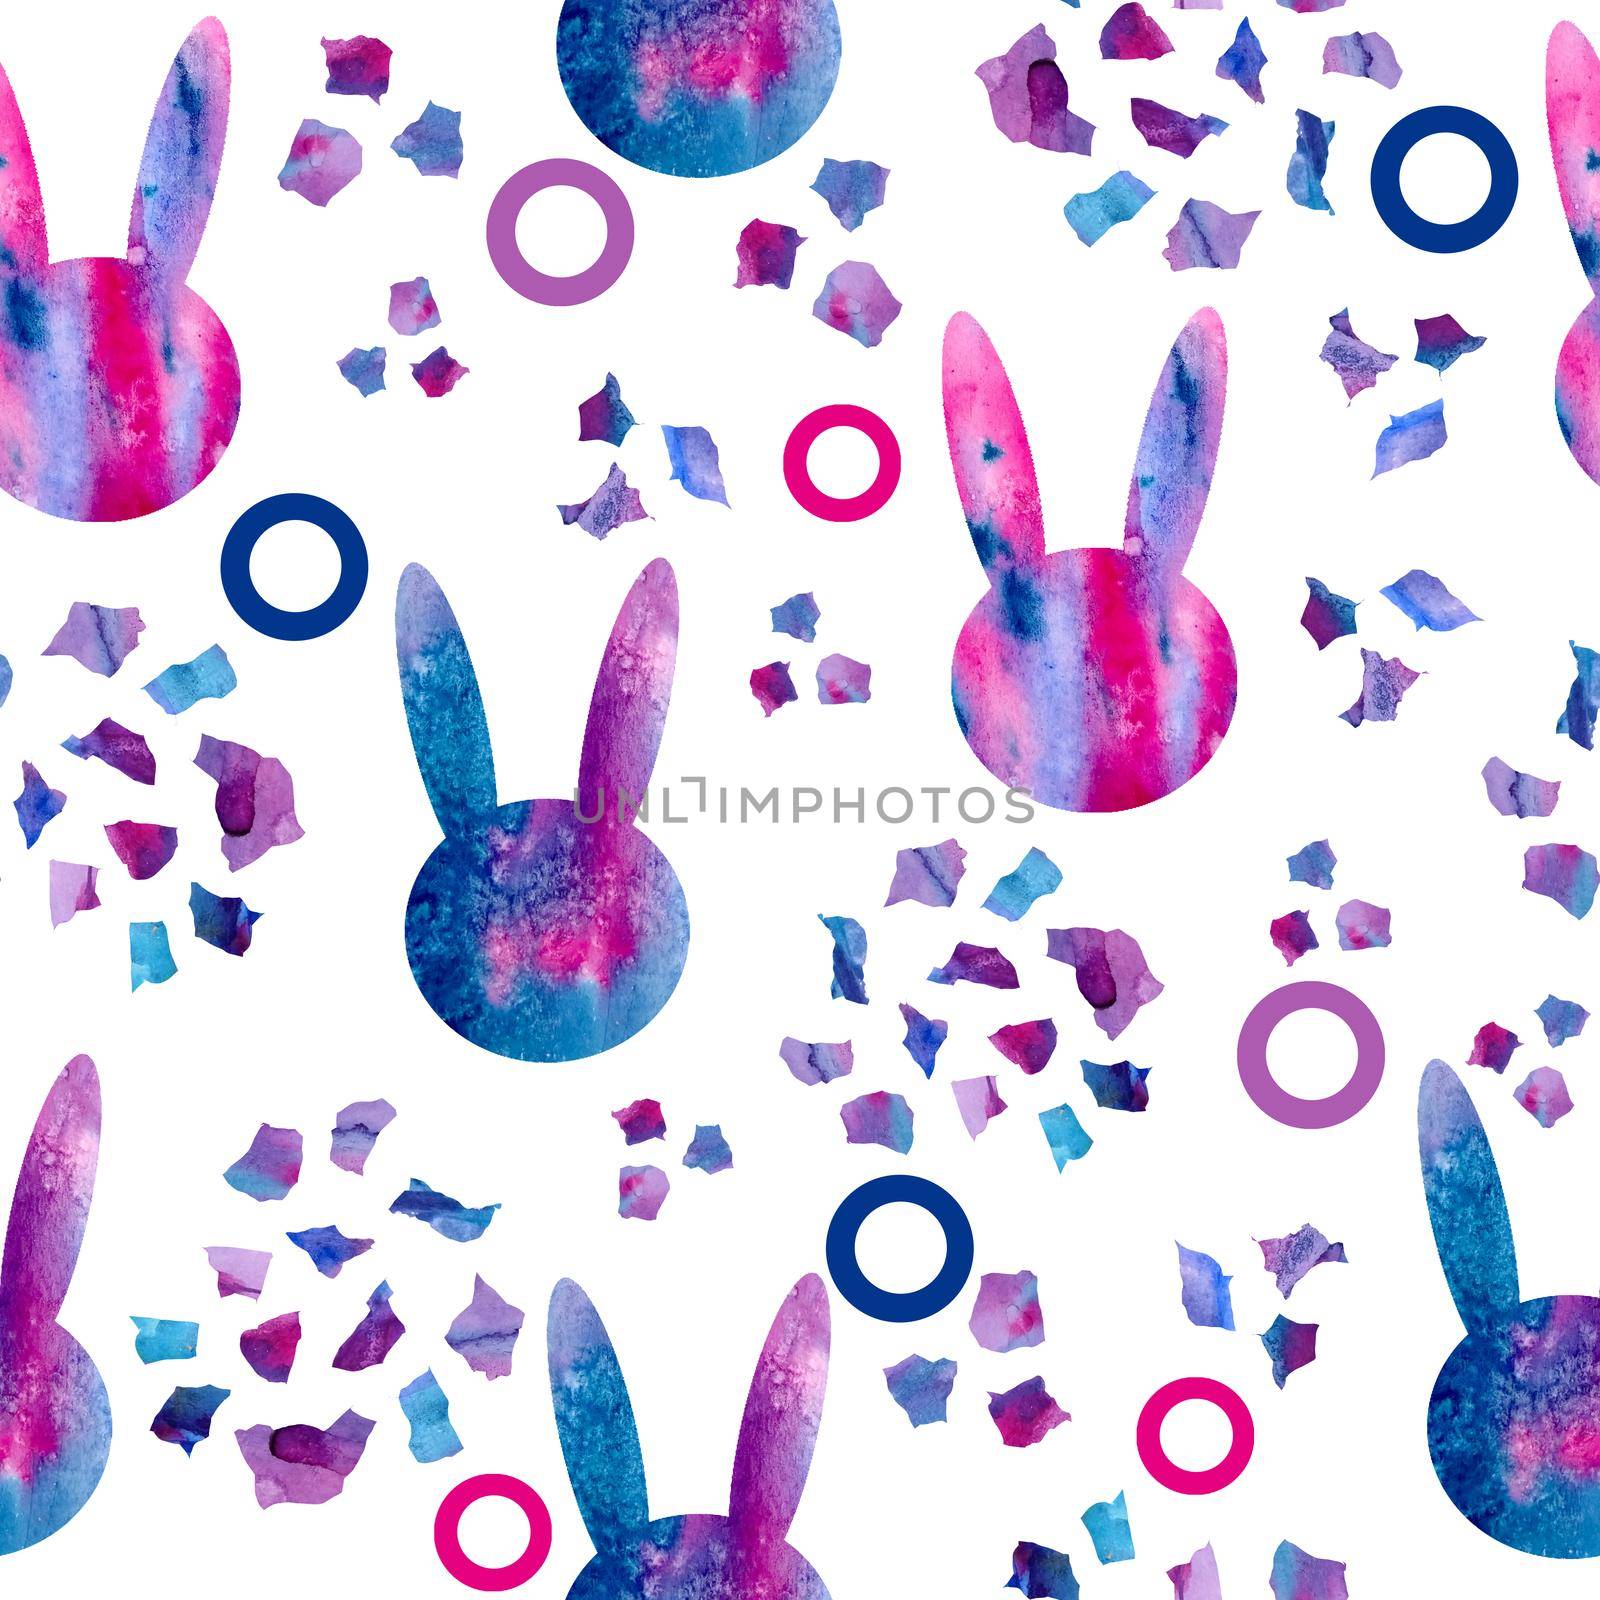 watercolor hand drawn seamless pattern illustration easter rabbits bunnies silhouette contour of abstract space galaxy lilac violet purple confetti blue background. For easter spring holiday decoration